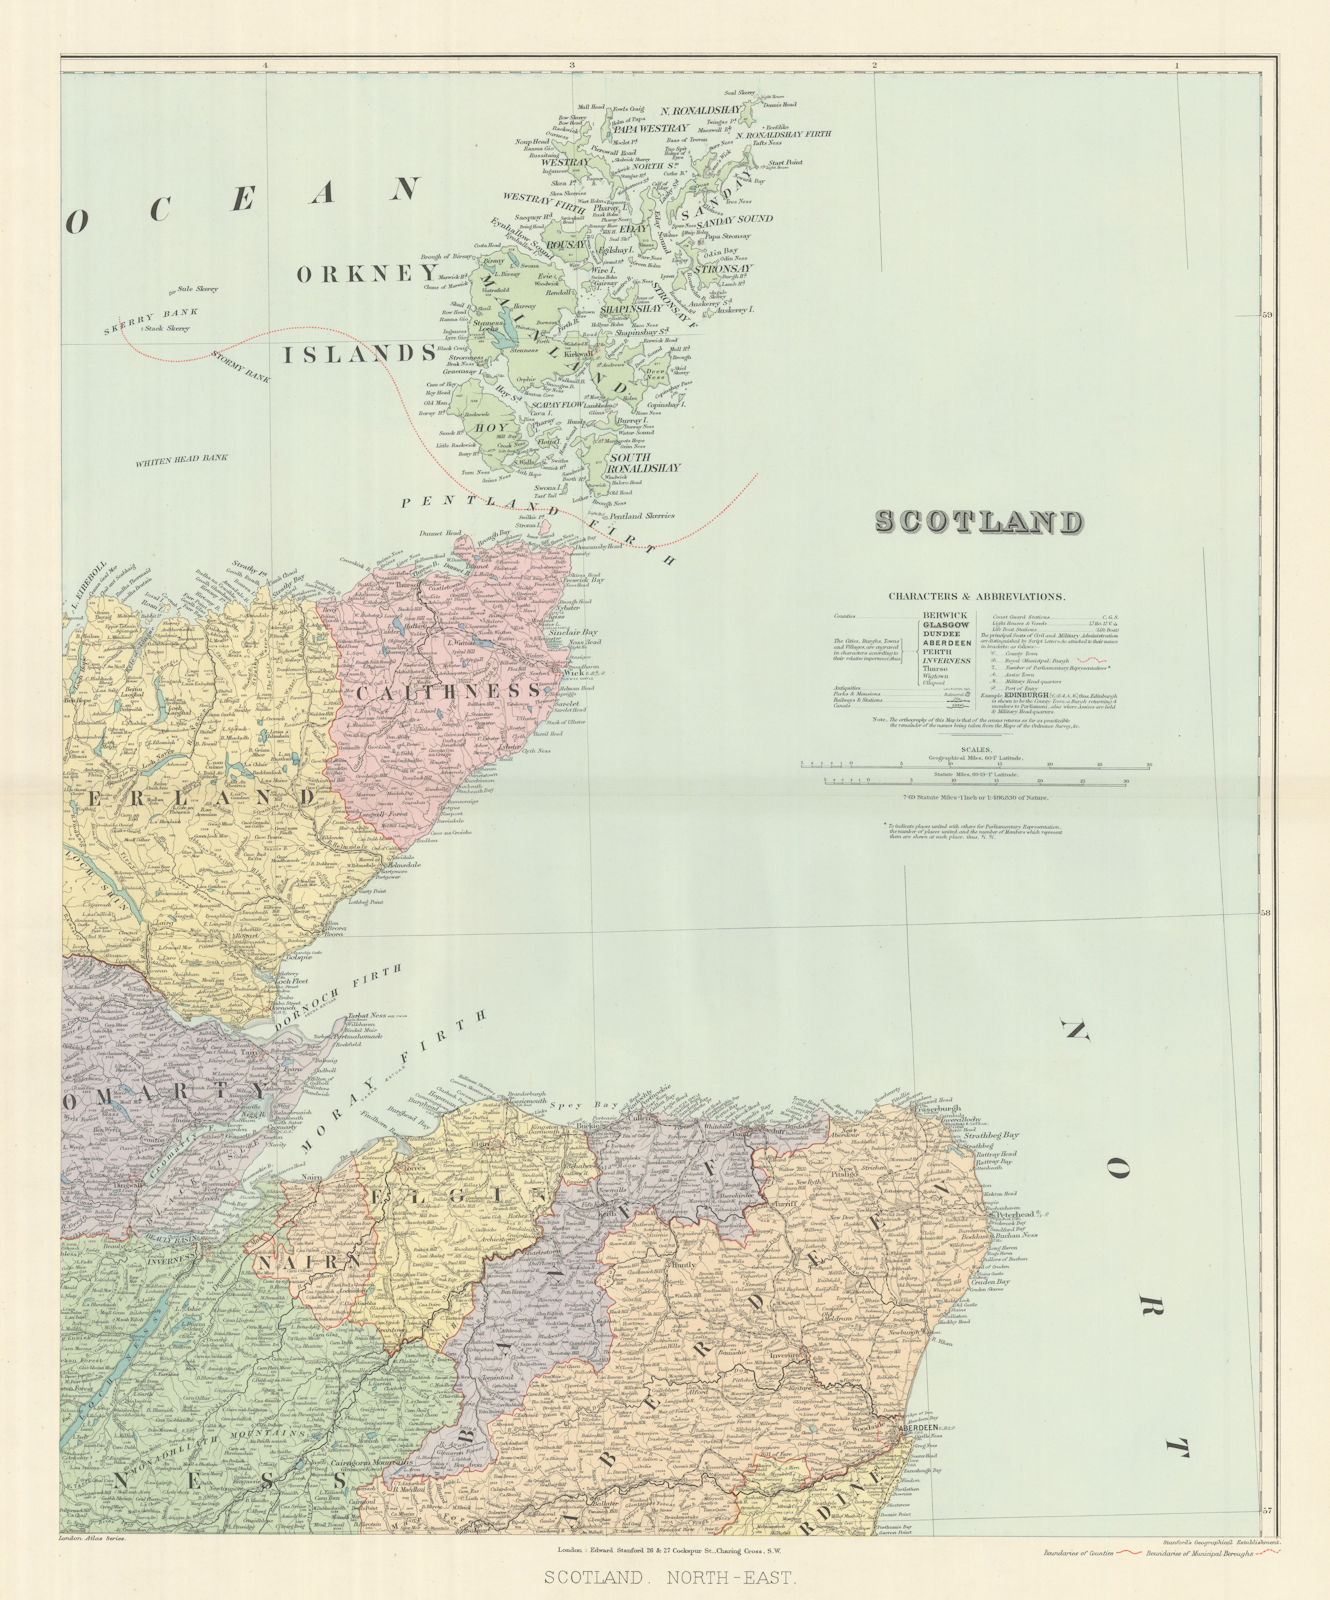 Associate Product Scotland N.E. Orkney Cathiness Banff Elgin Aberdeen Sutherland STANFORD 1894 map